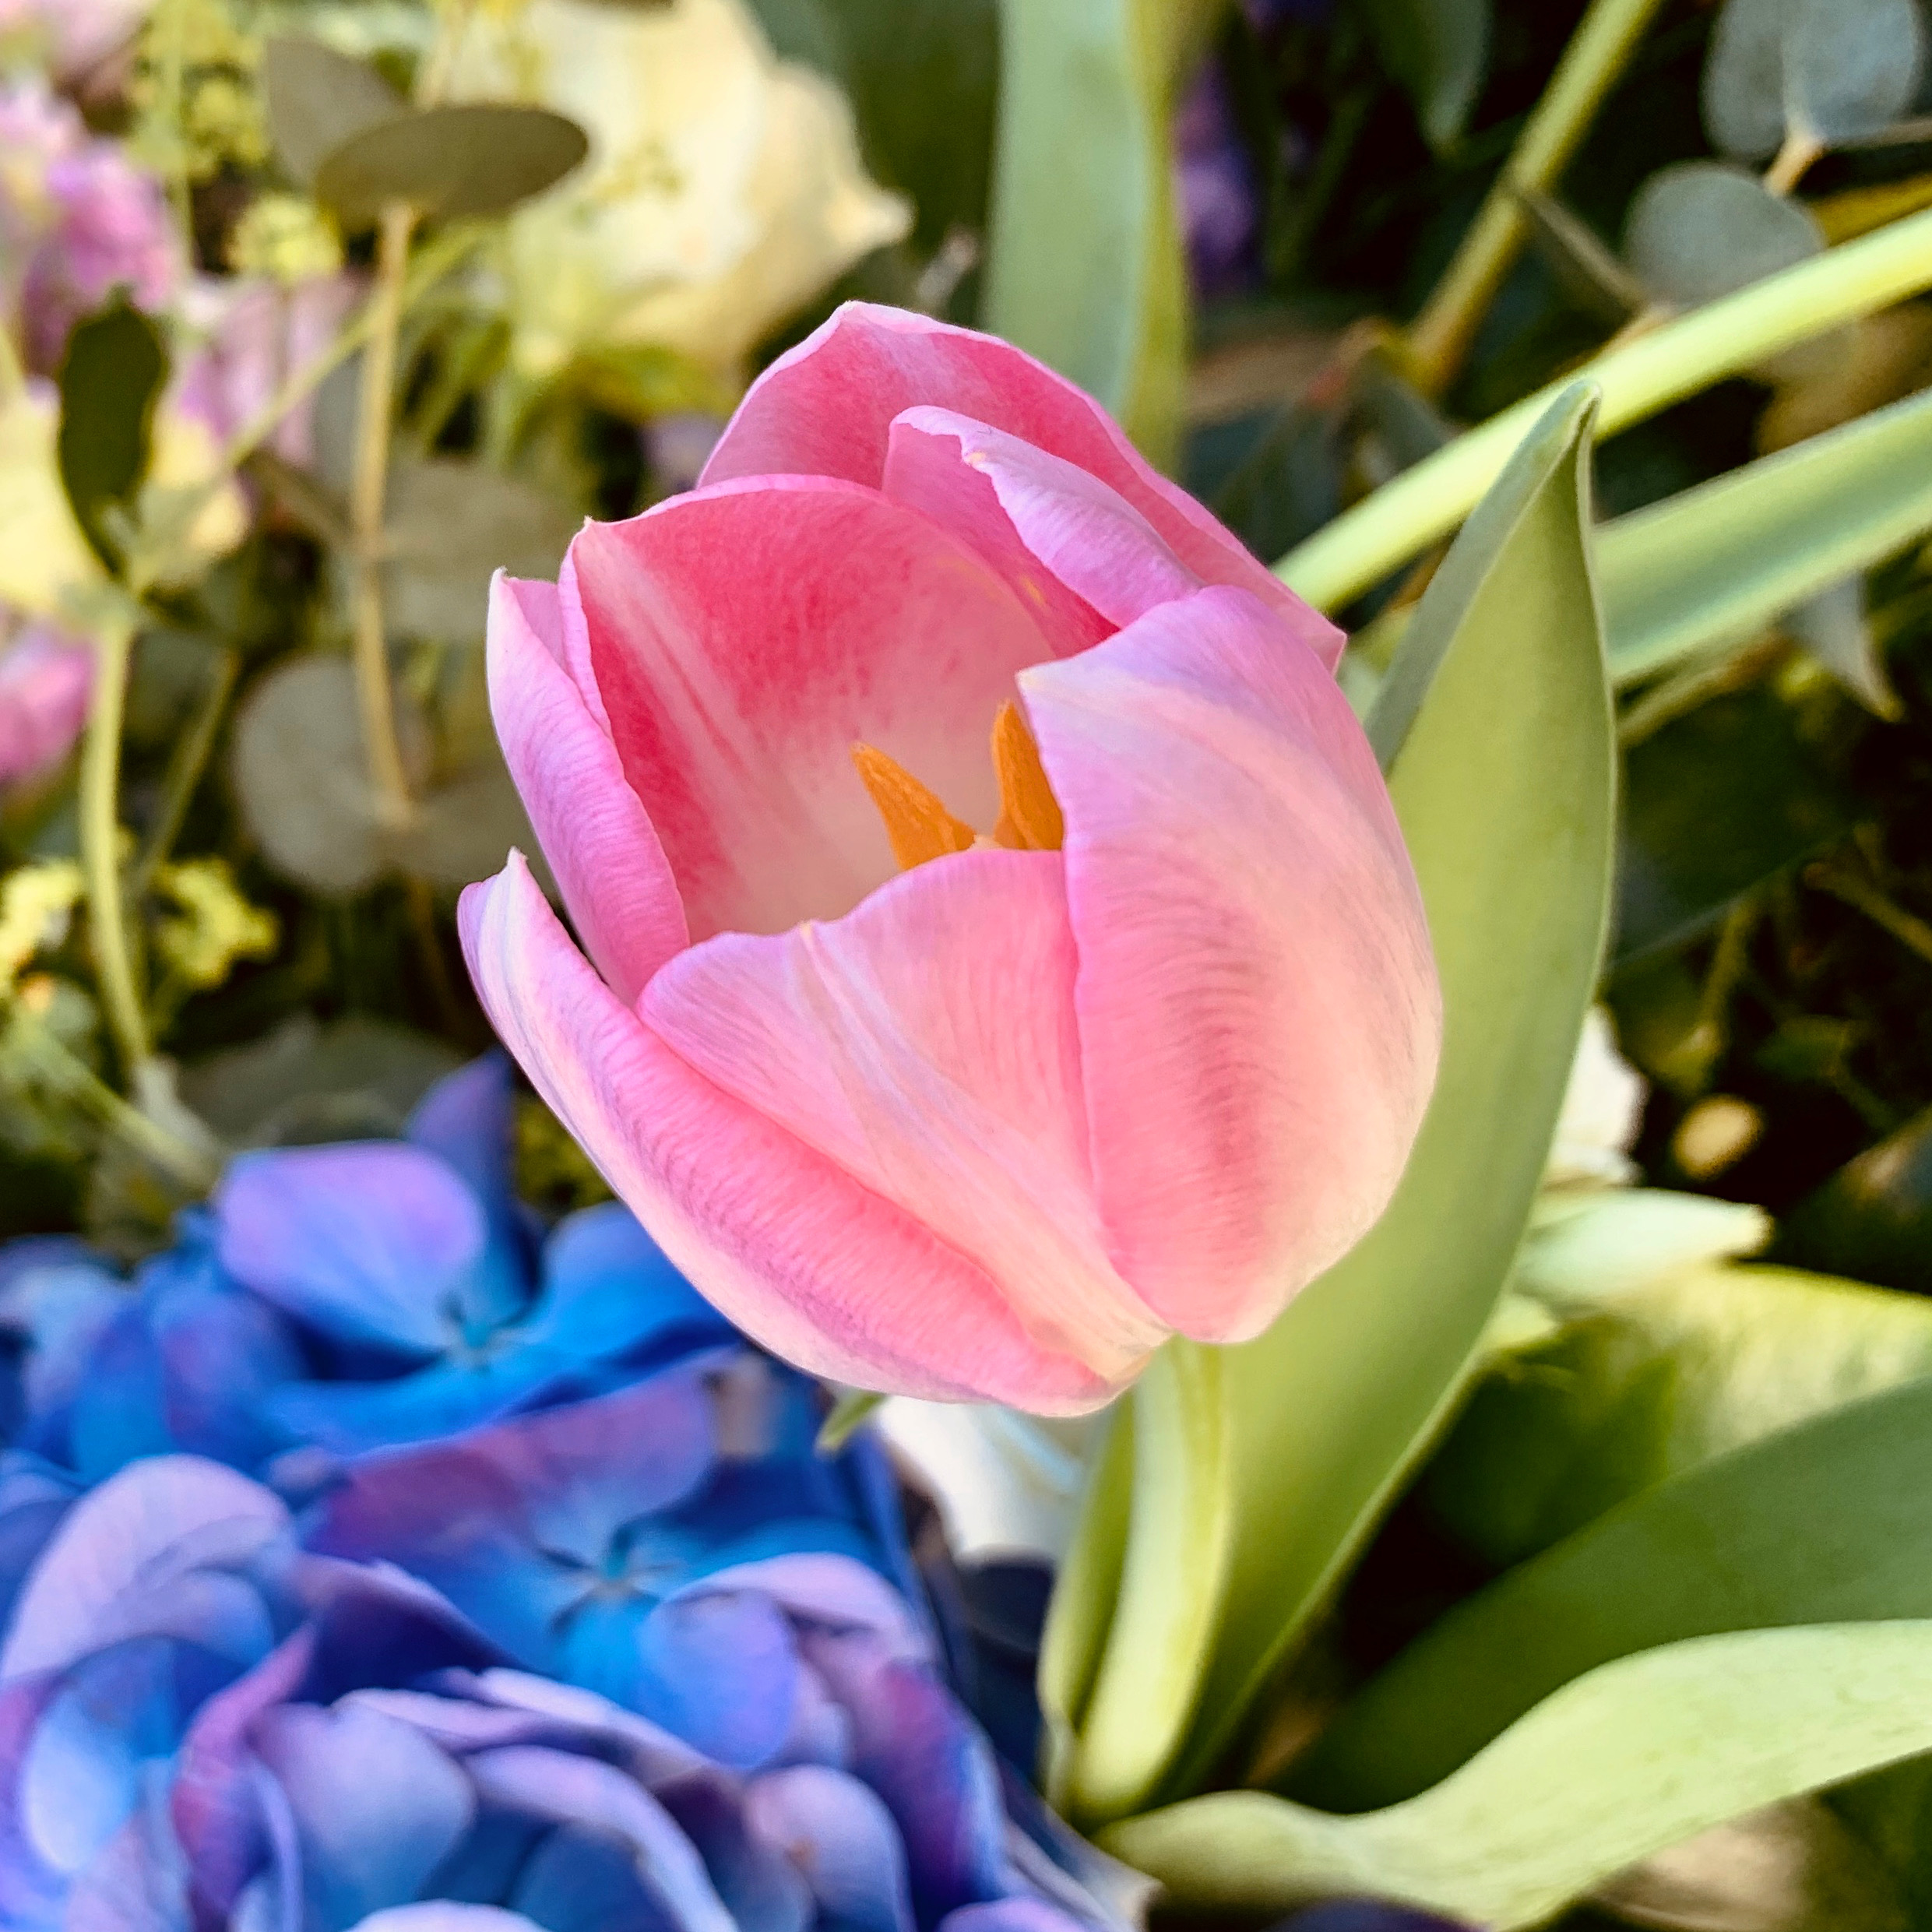 Image : A photograph of a pink tulip amongst an arrangement of different flowers and foliage.